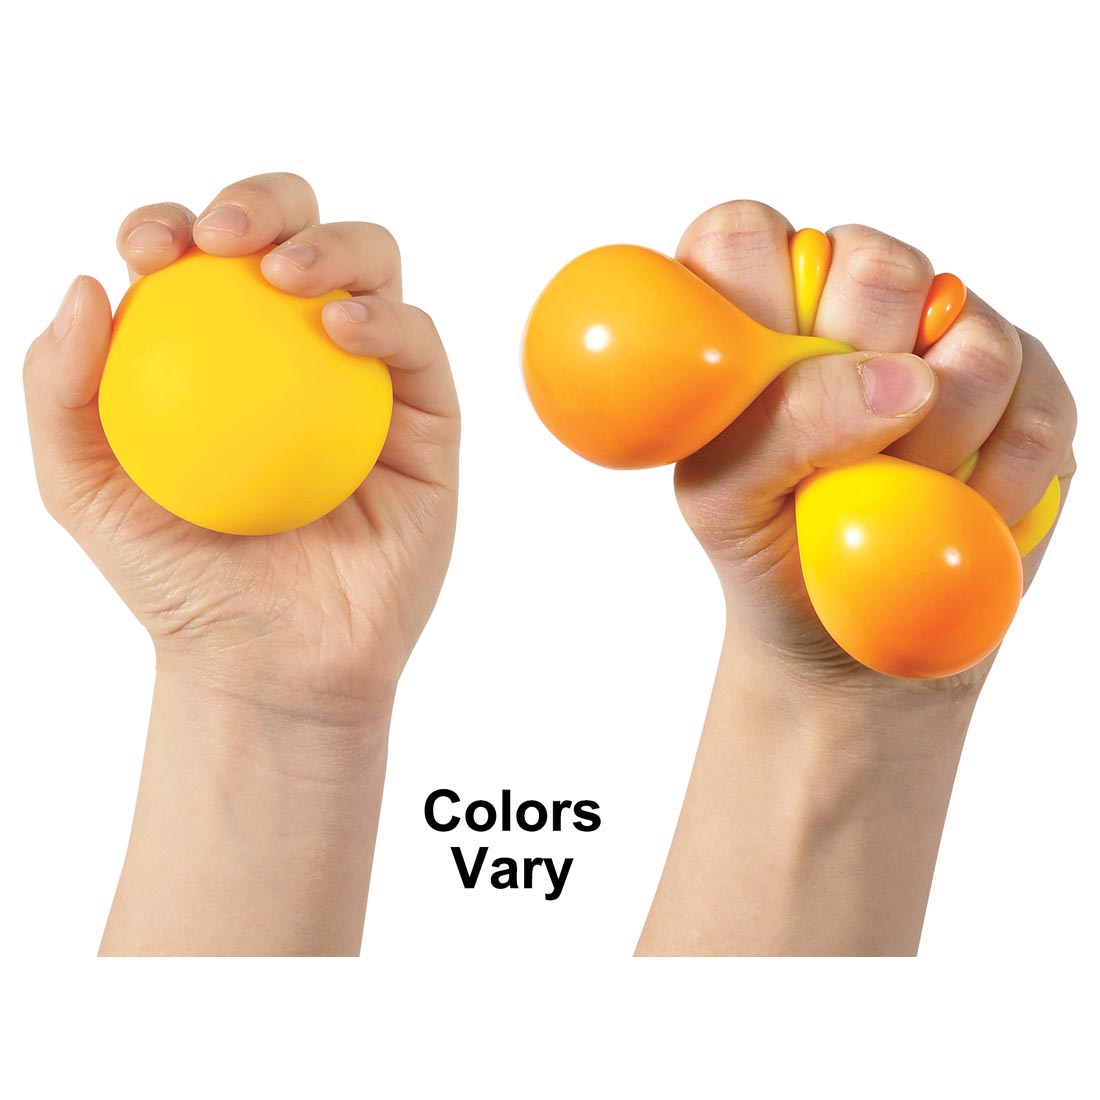 Two hands each holding a Color Change Nee Doh Stress Ball with the text Colors Vary